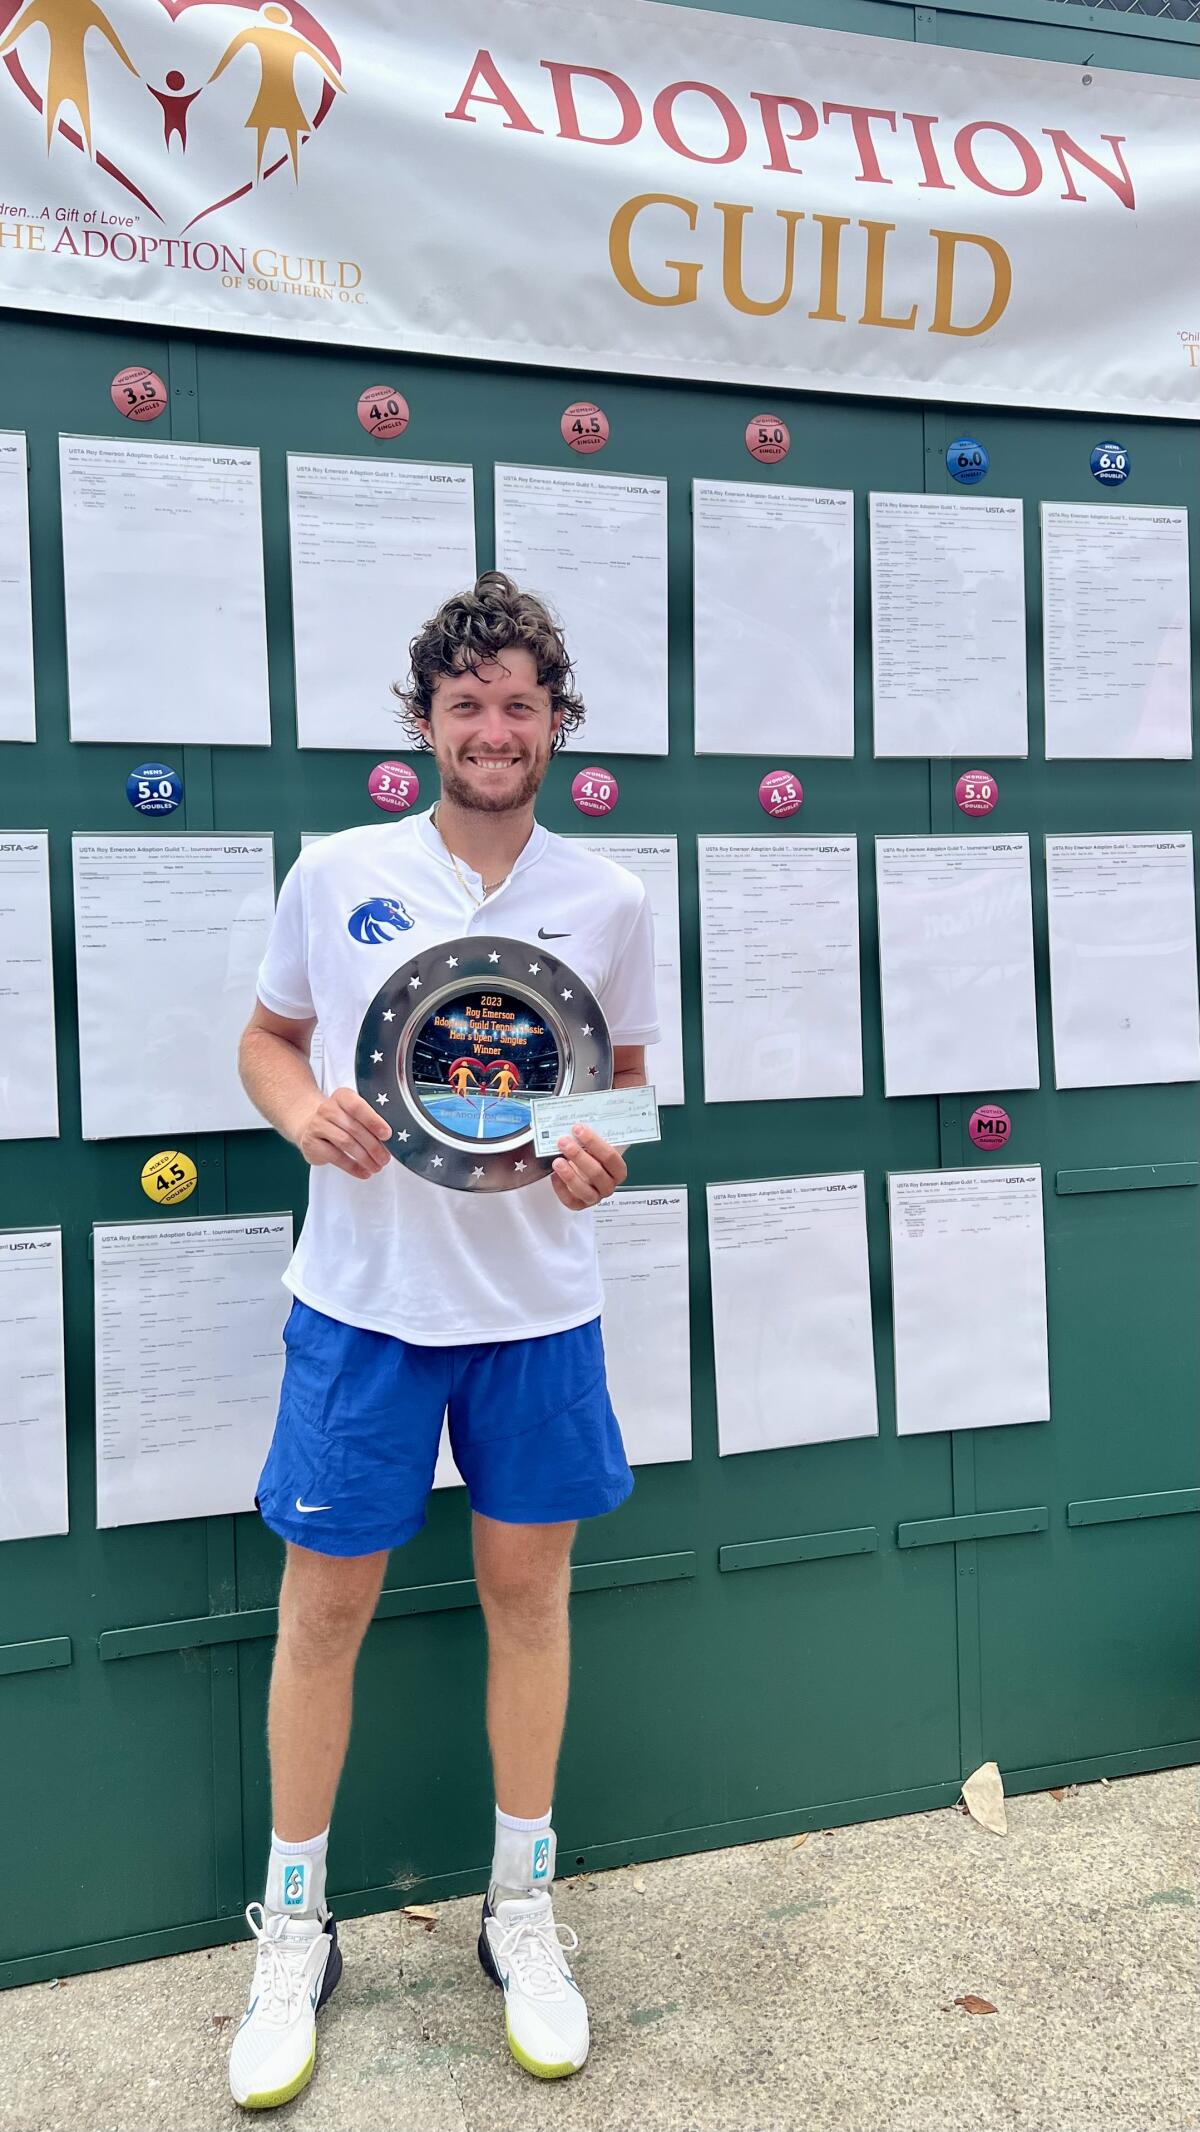 Jett Middleton won the men's open singles title at the Adoption Guild this year.